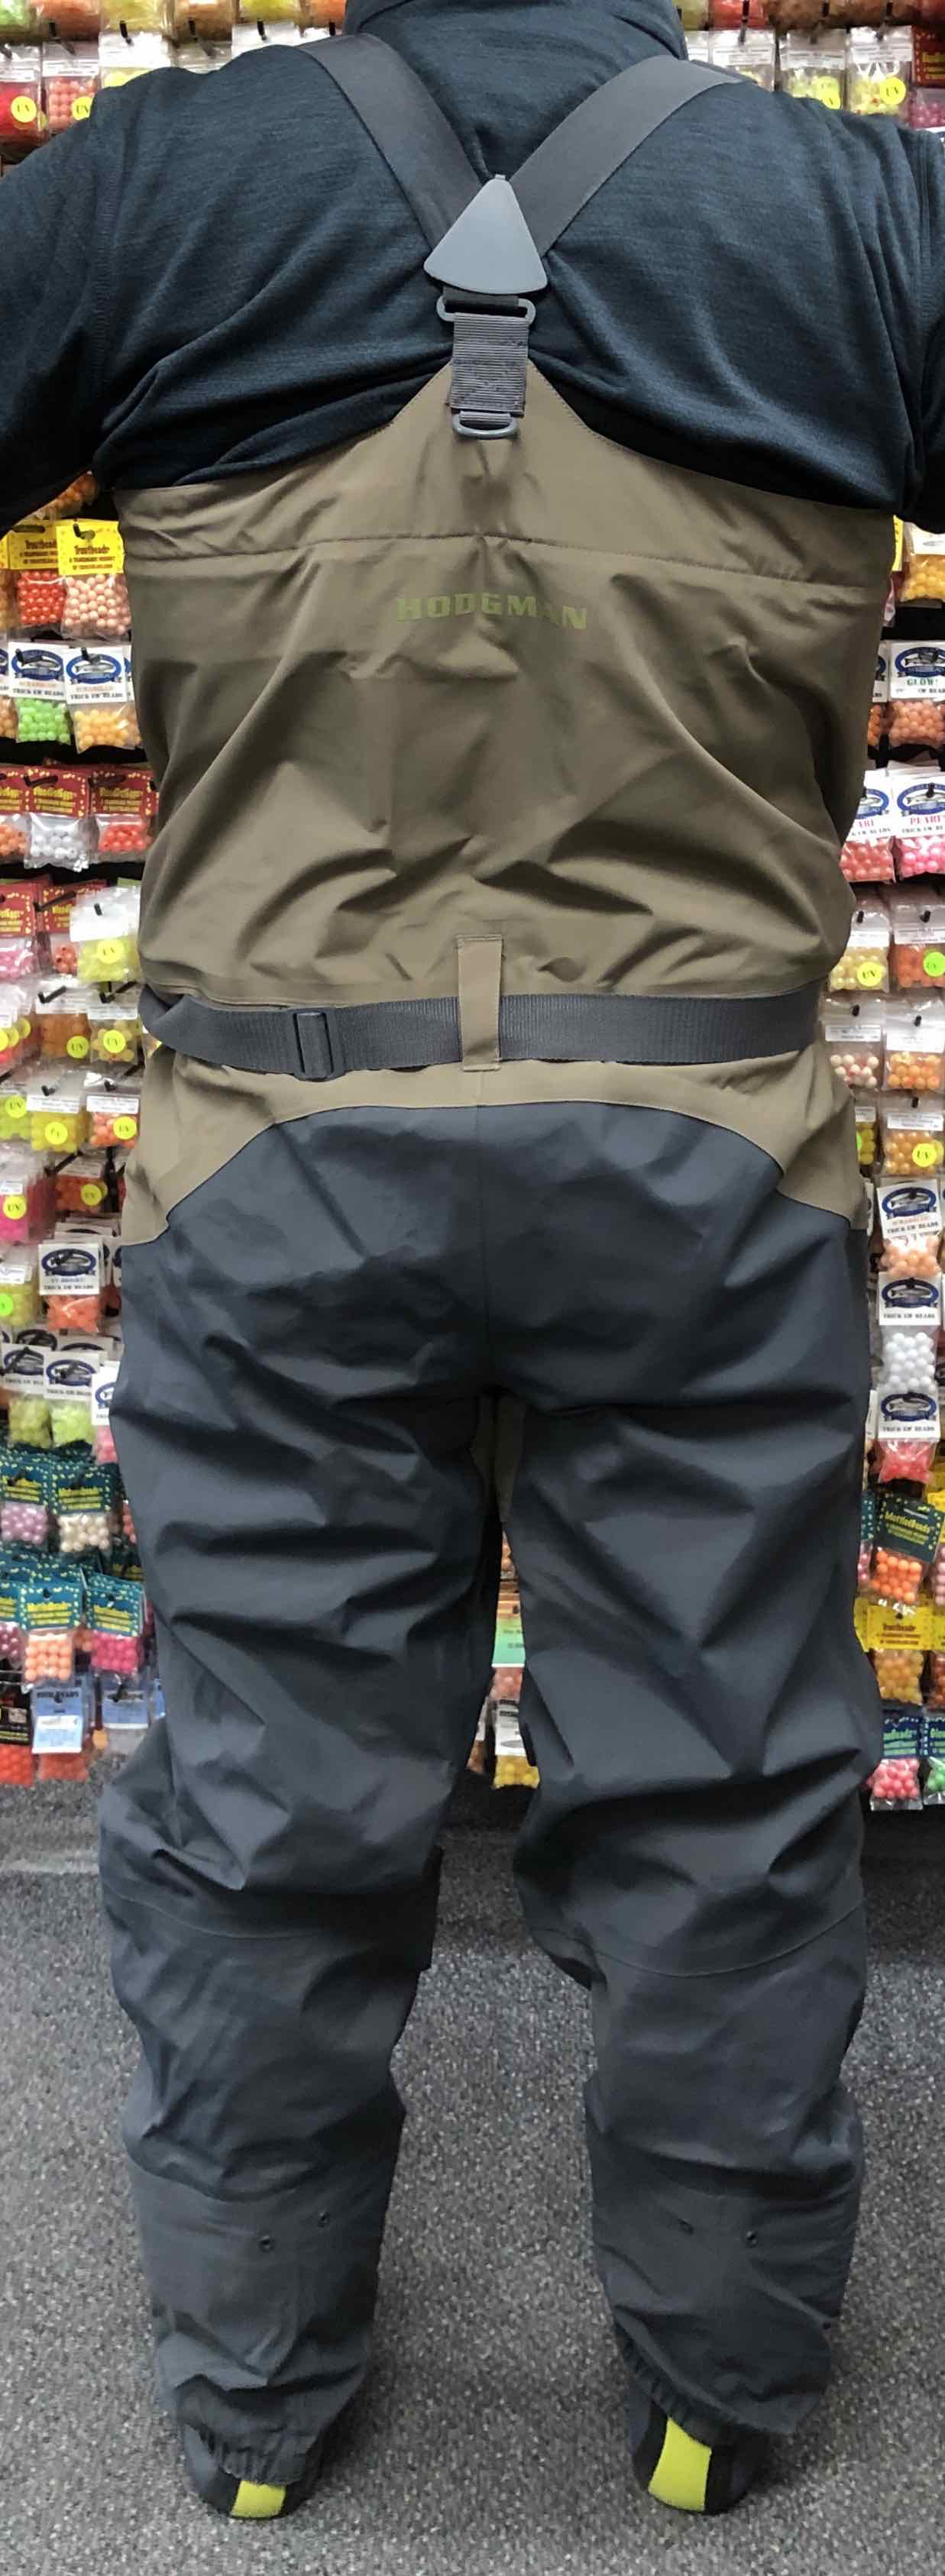 Hodgman HS Breathable Waders - NEW IN BOX! - $200